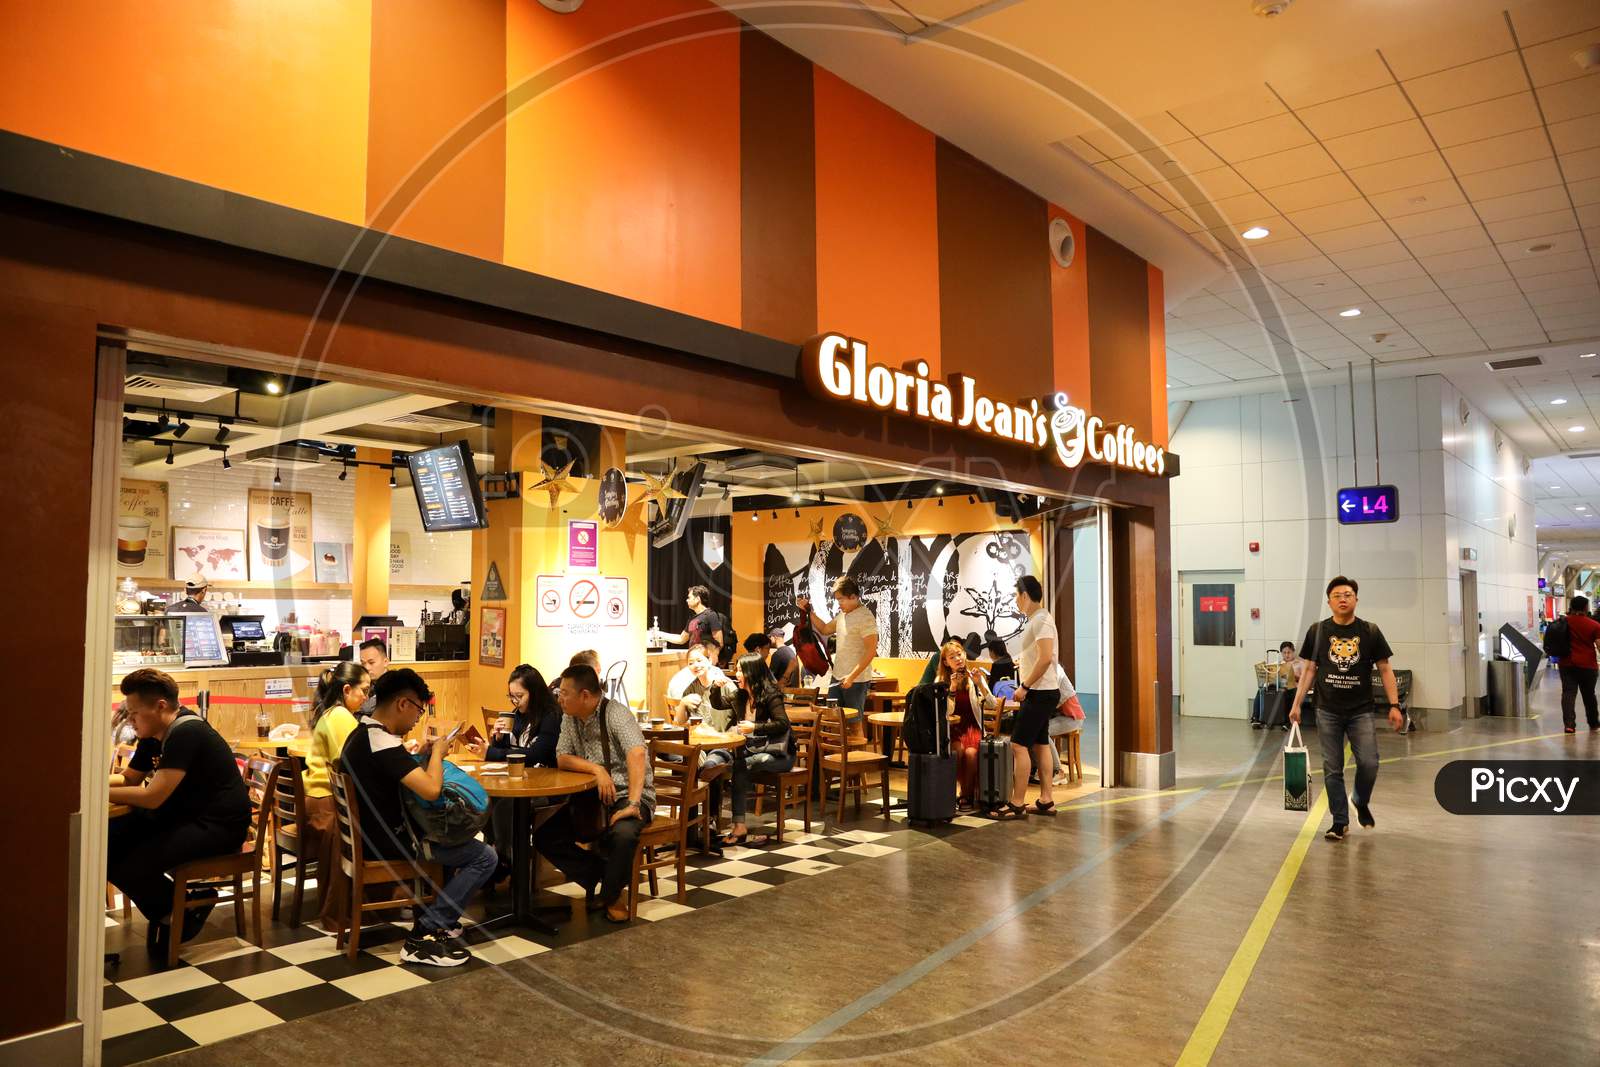 Gloria jeans And Coffees Store In KL International Airport, Malaysia